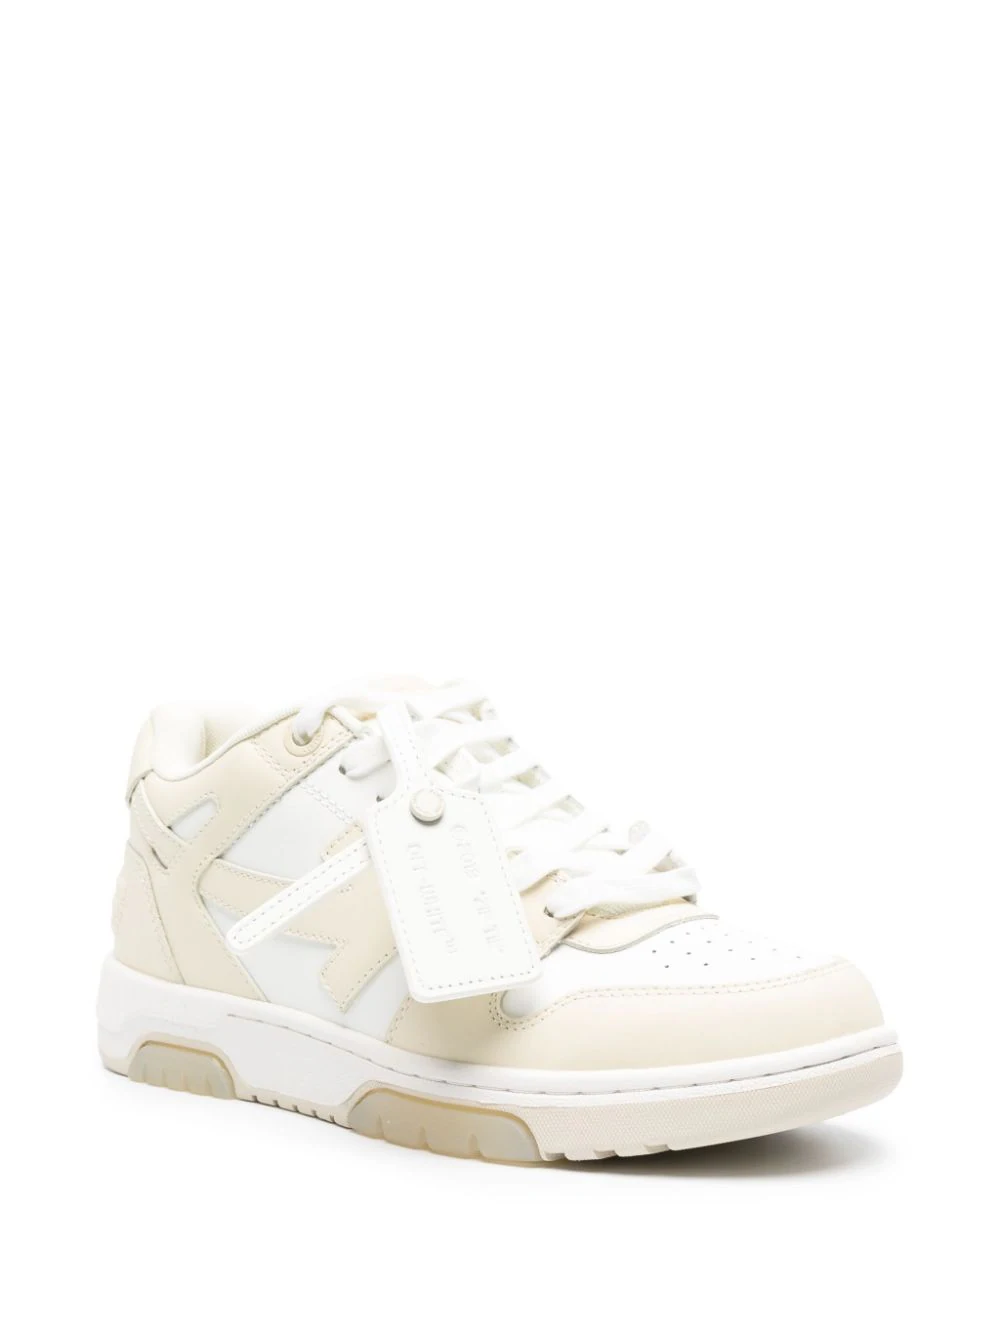 Off-White c/o Virgil Abloh Ooo Low Sartorial Stitching Sneakers in